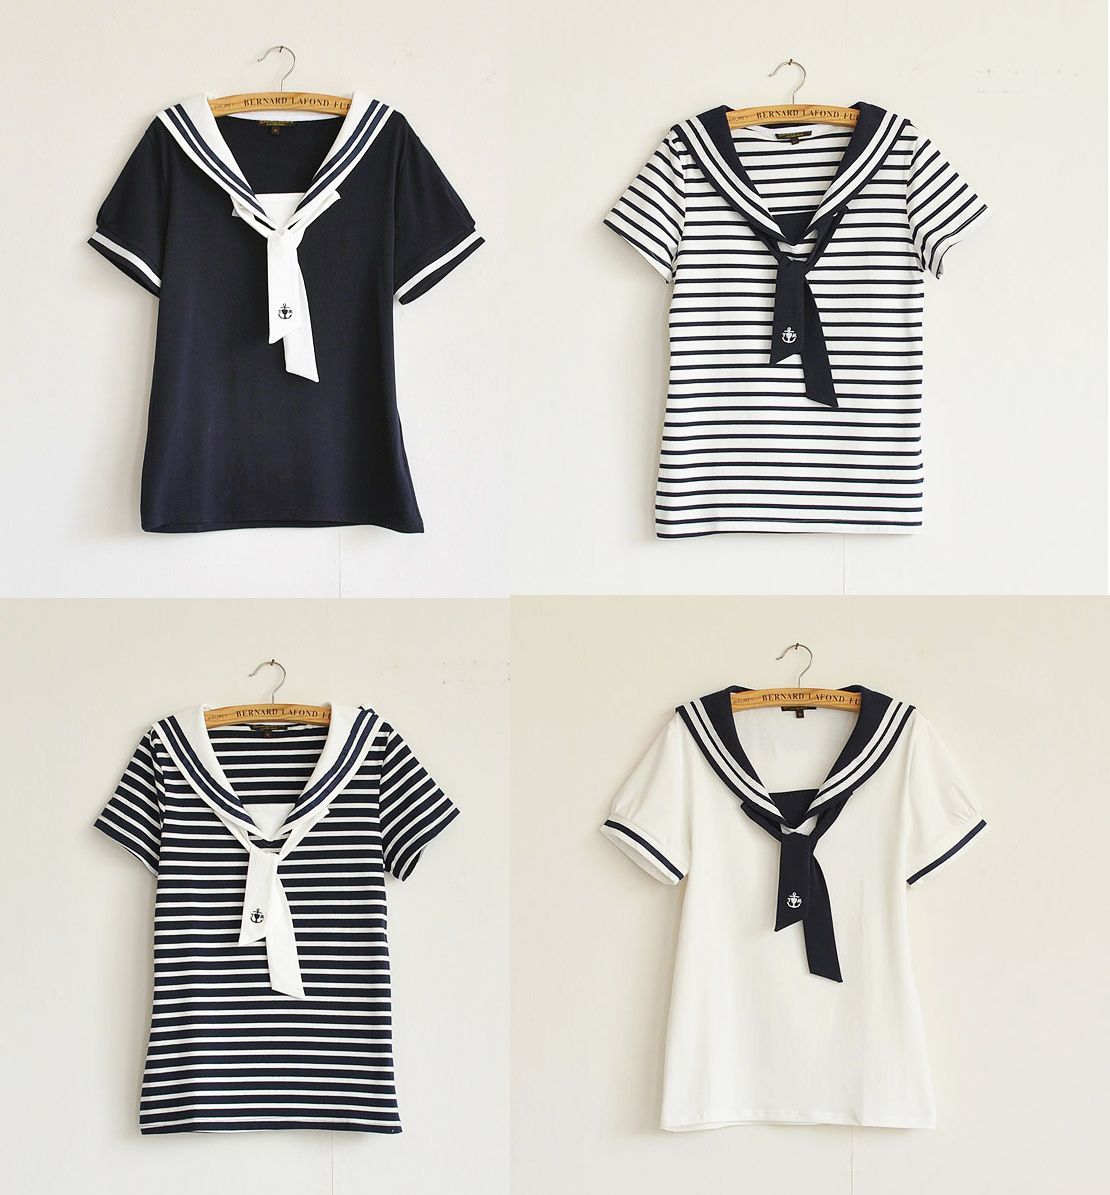 How To Style Sailor Shirt